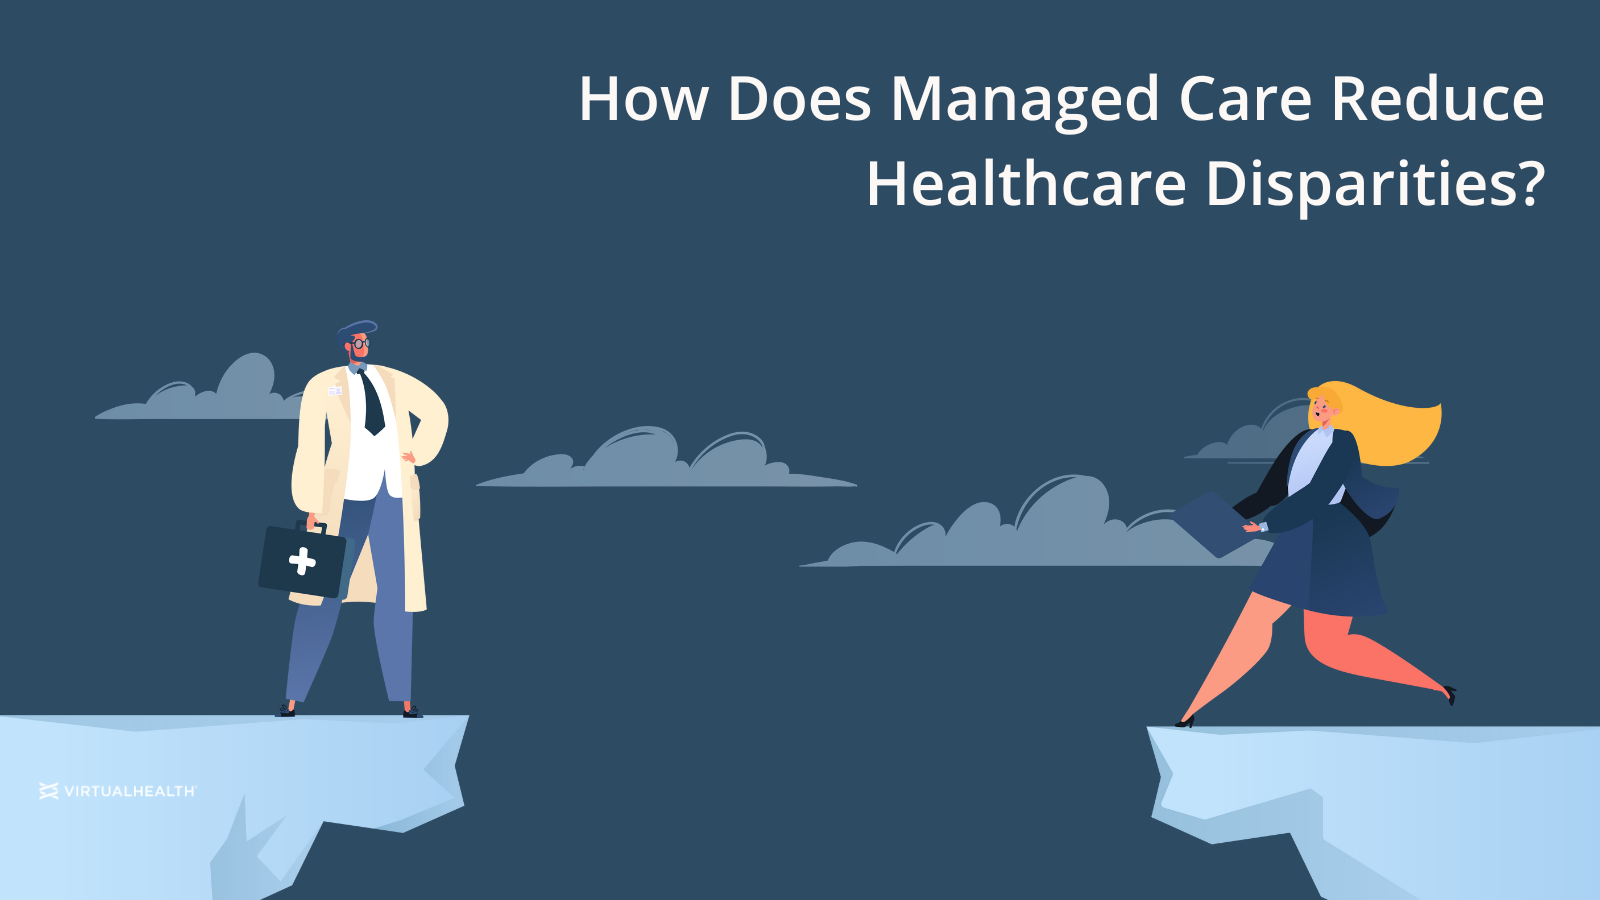 How Does Managed Care Reduce Healthcare Disparities